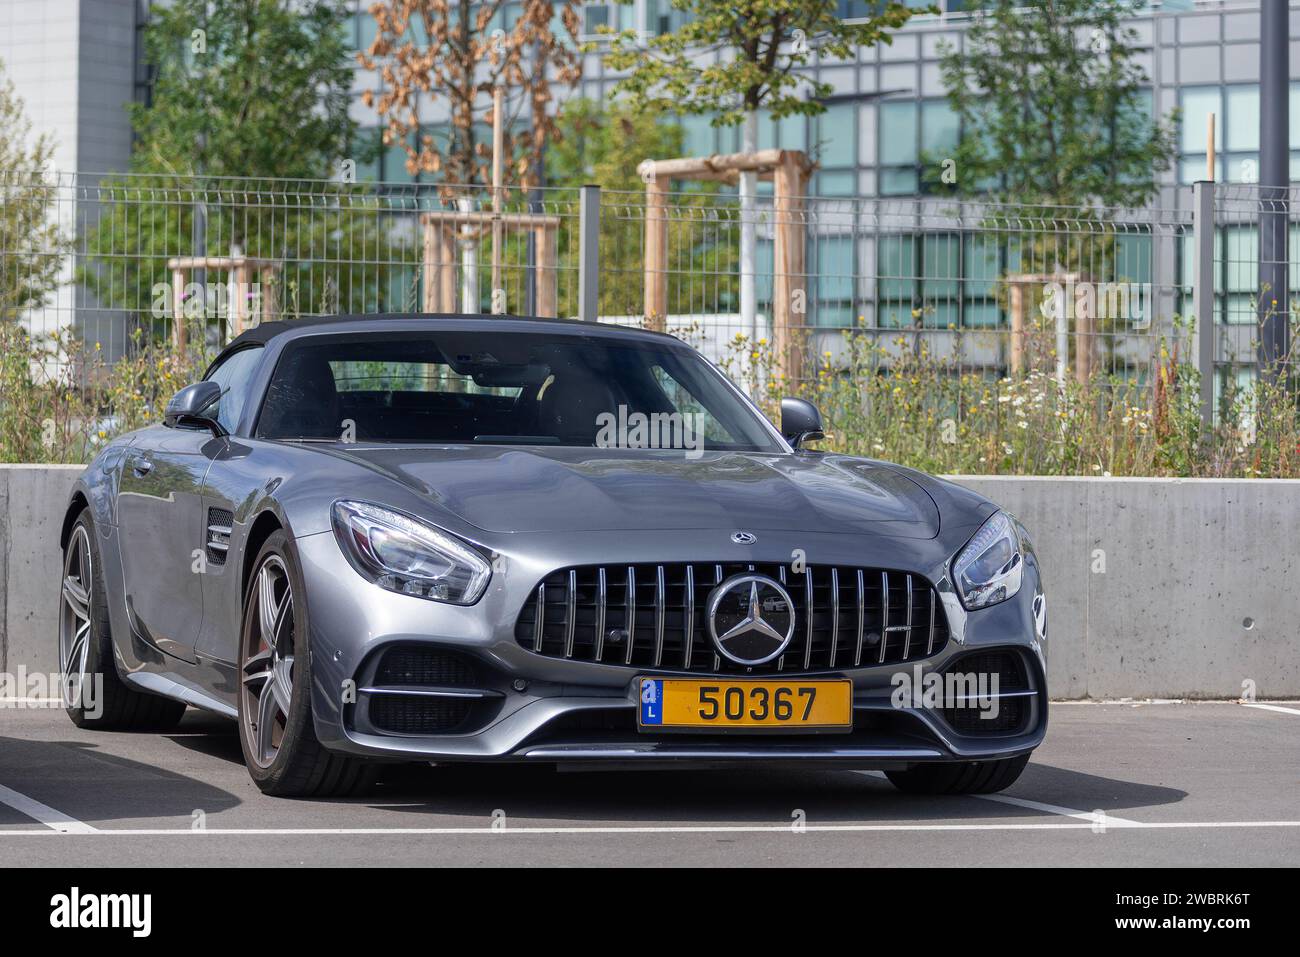 Luxembourg City, Luxembourg - Grey Mercedes-AMG GT C Roadster parked on the street. Stock Photo